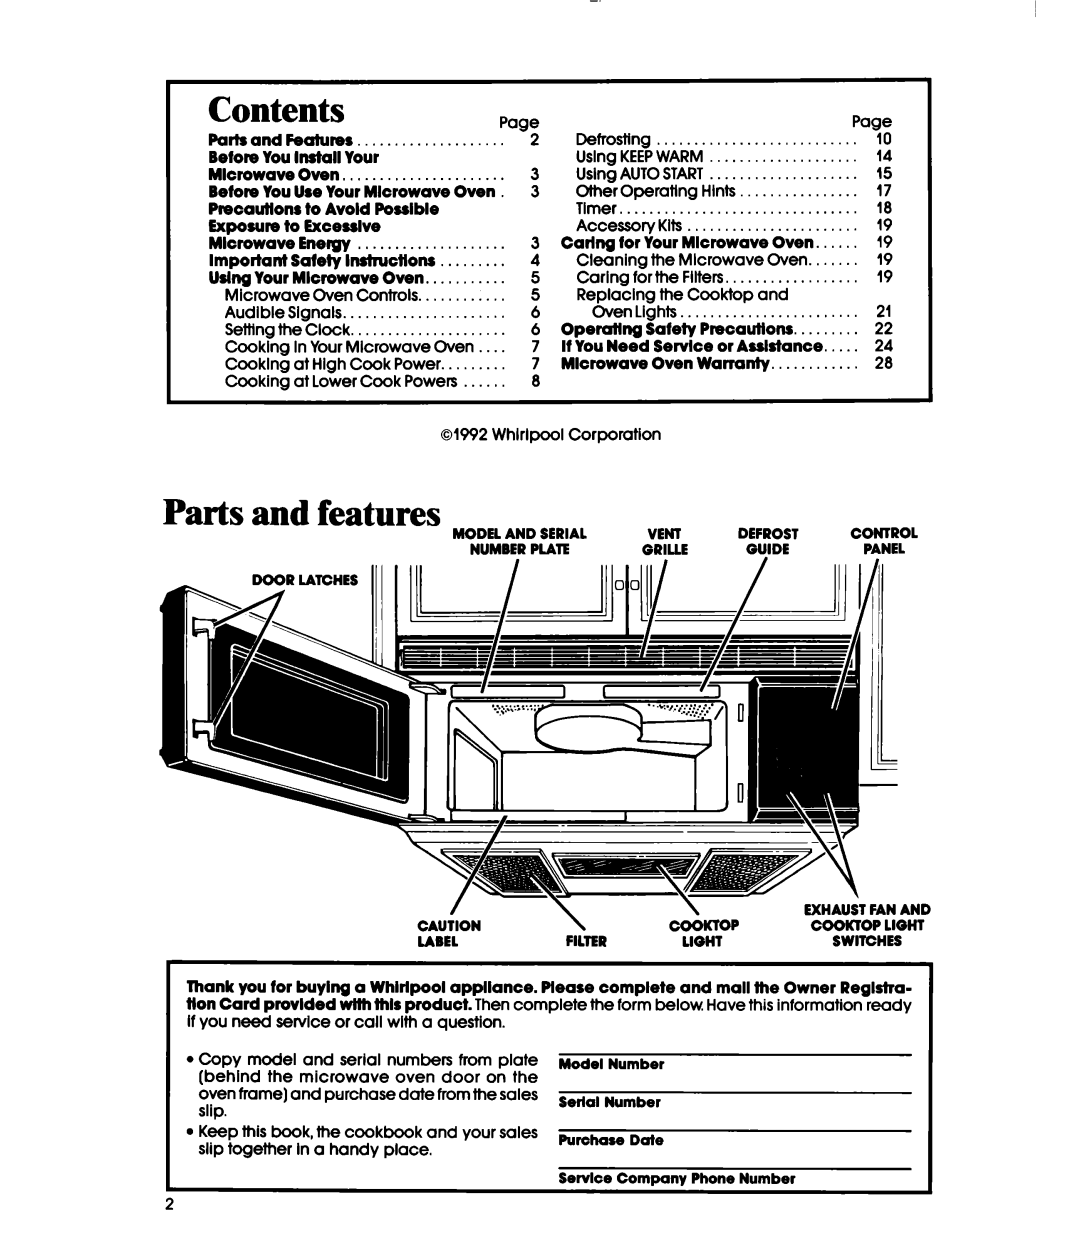 Whirlpool MH6100XY manual Contents, Parts and features 